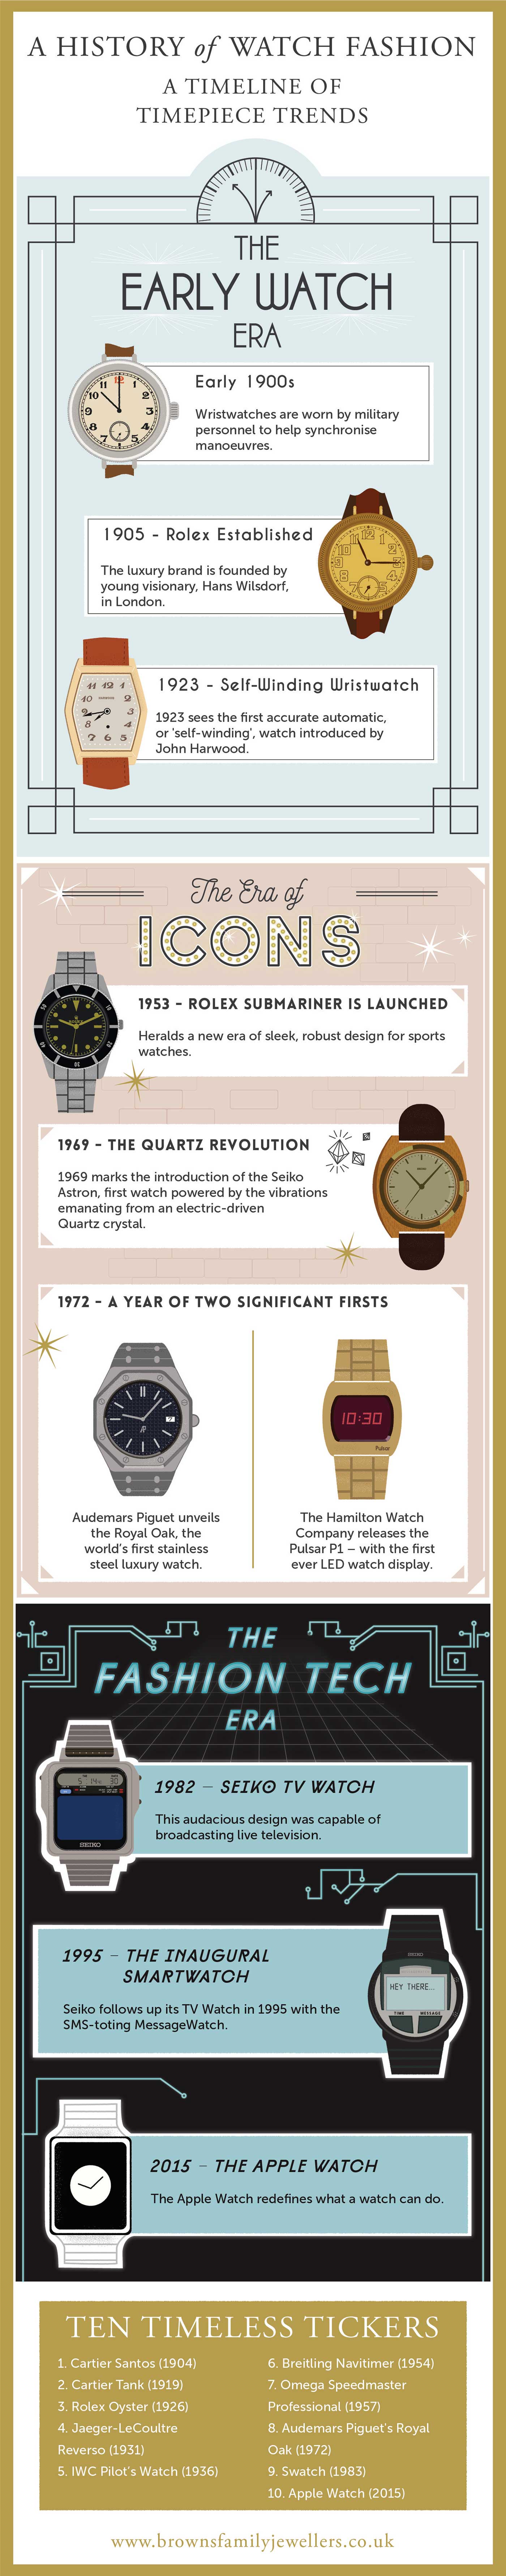 A history of Watch Fashion in 100 Years - Infographic